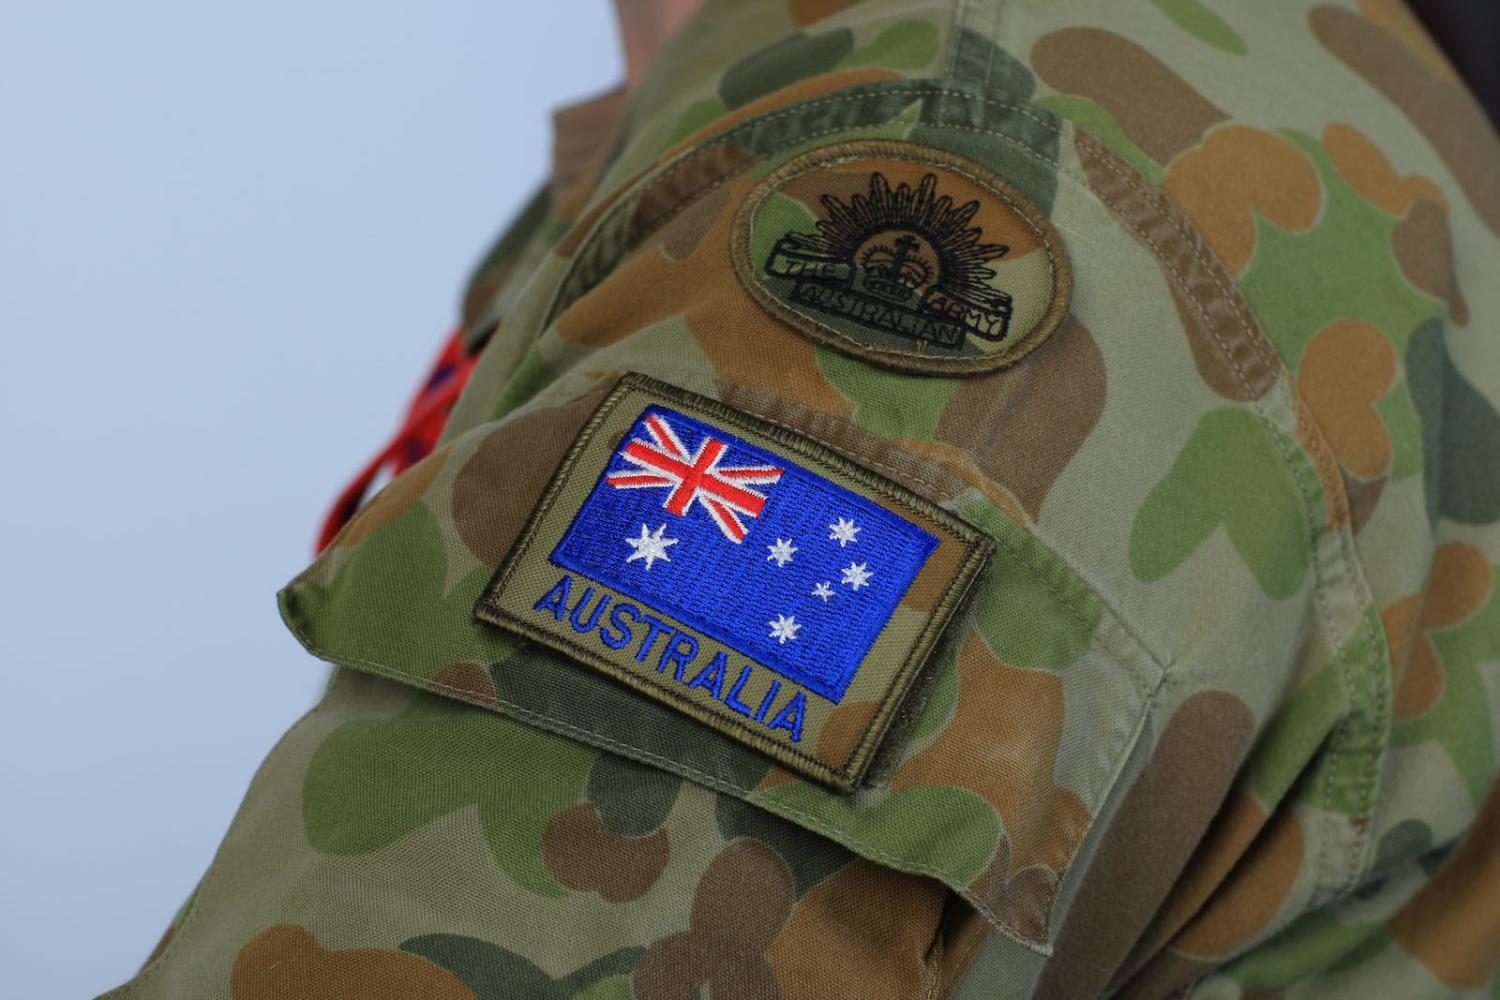 A temporarily larger cohort of senior officers and senior soldiers are moving out of military service (Photo: Department of Defence)